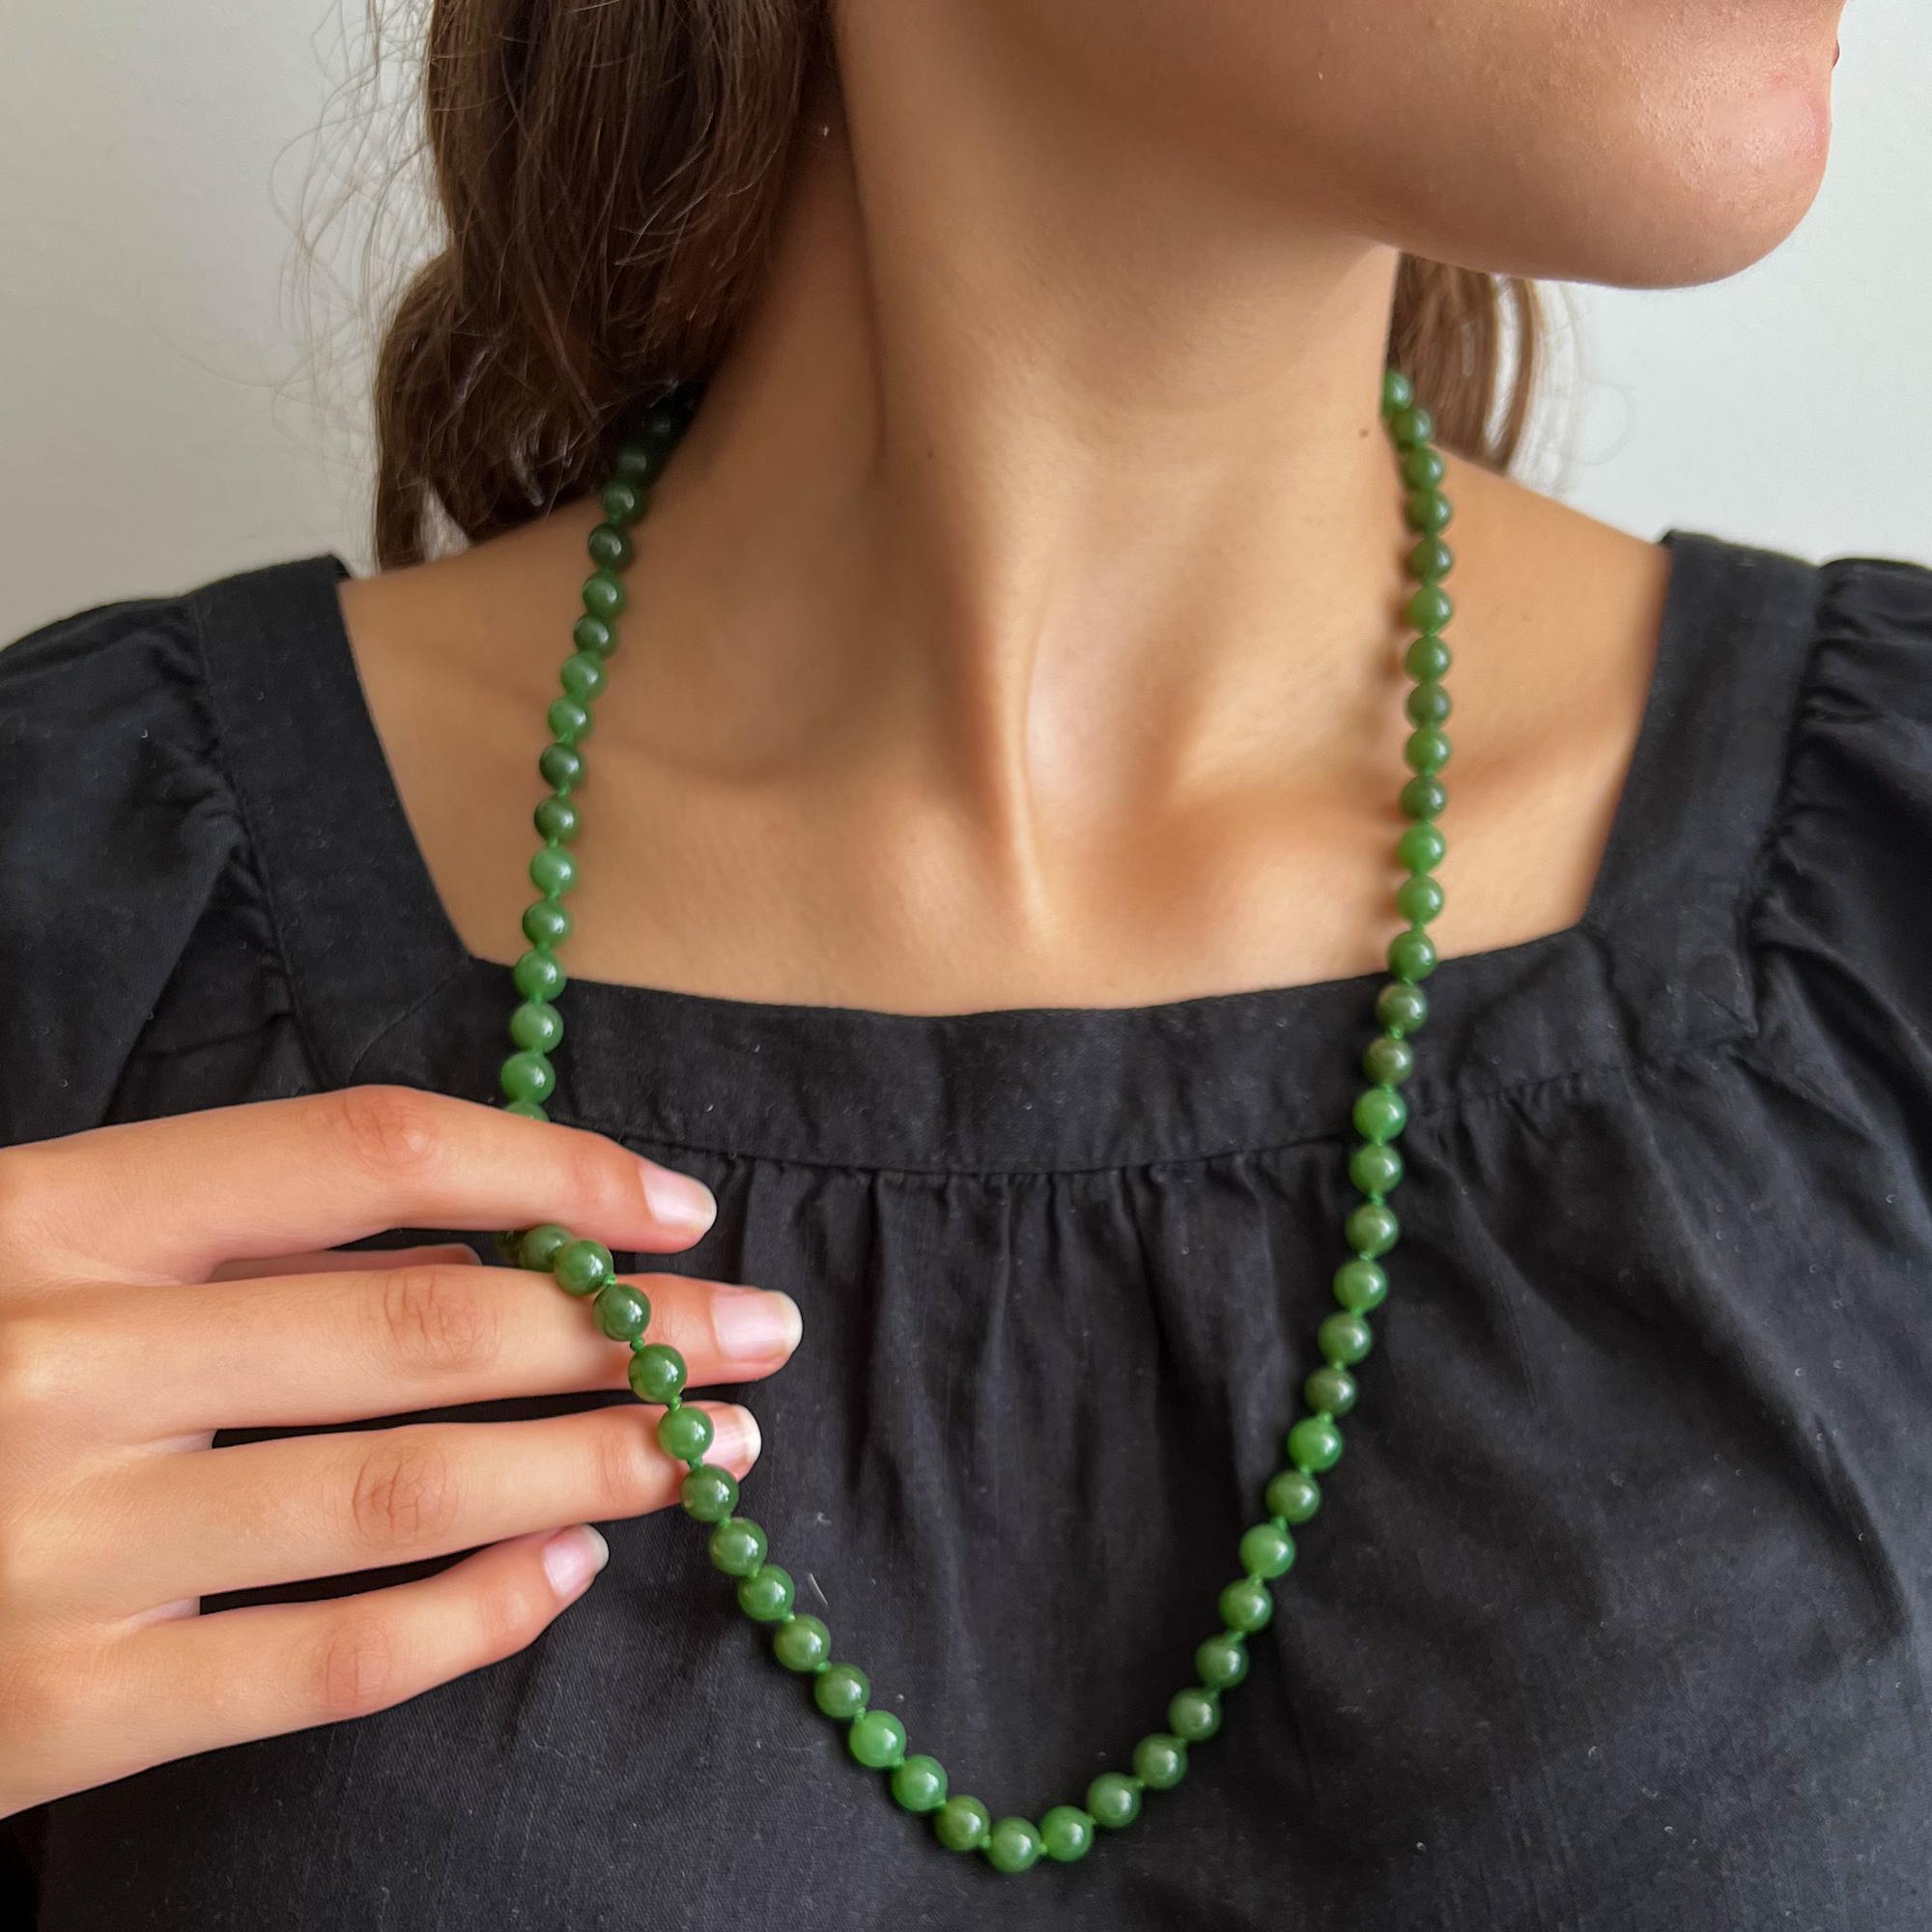 This vintage green nephrite jade beaded necklace is made of one single-strand. The length of the necklace is long and consists of round-shaped nephrite jade stones. These jade beads have a very nice green color and are equally sized. To keep some